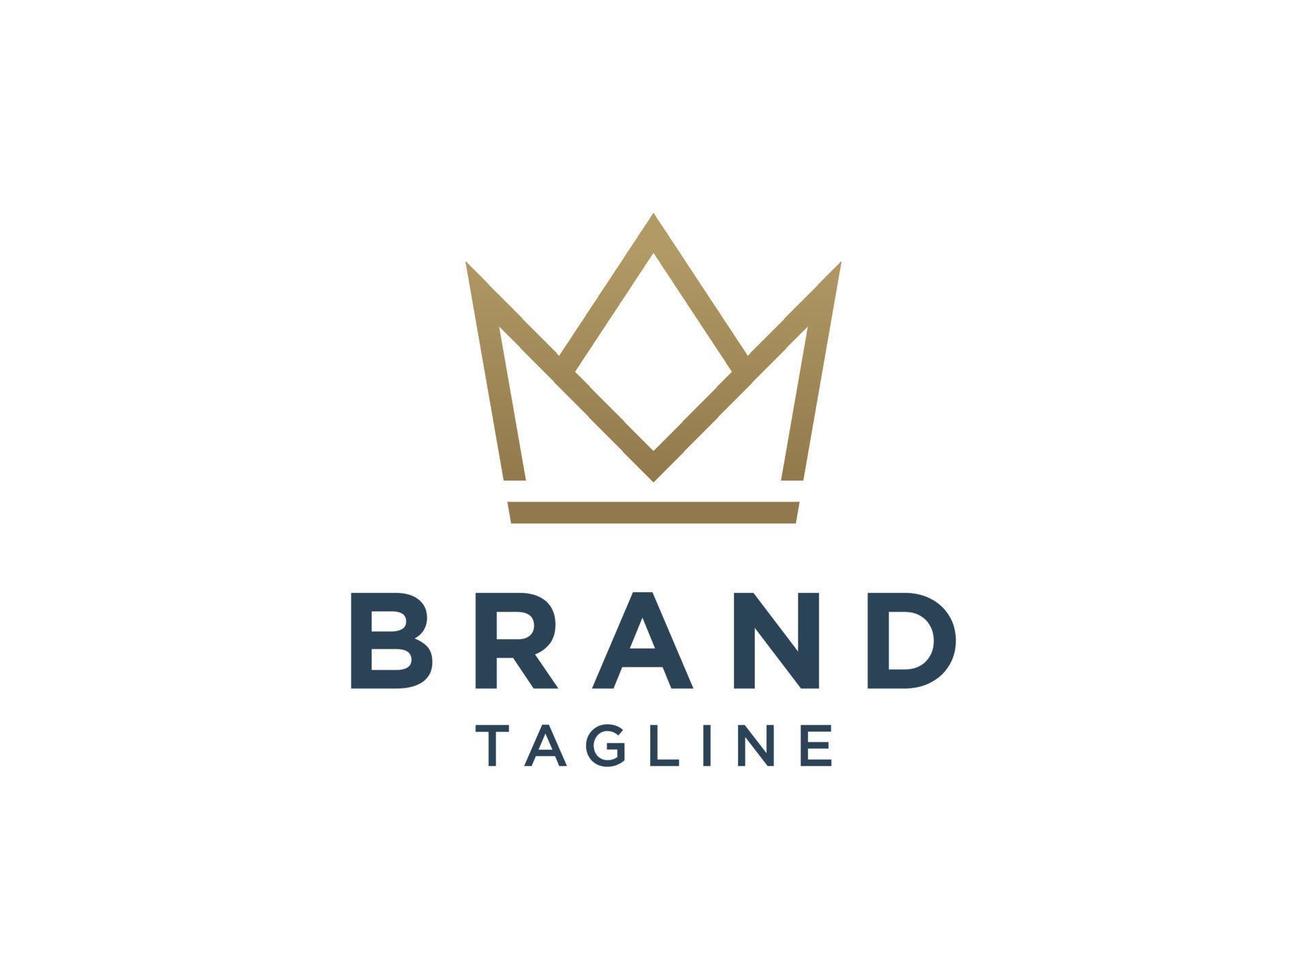 Royal Crown Logo. Gold Geometric Crown Line Icon isolated on White Background. Usable for Business and Branding Logos. Flat Vector Logo Design Template Element.